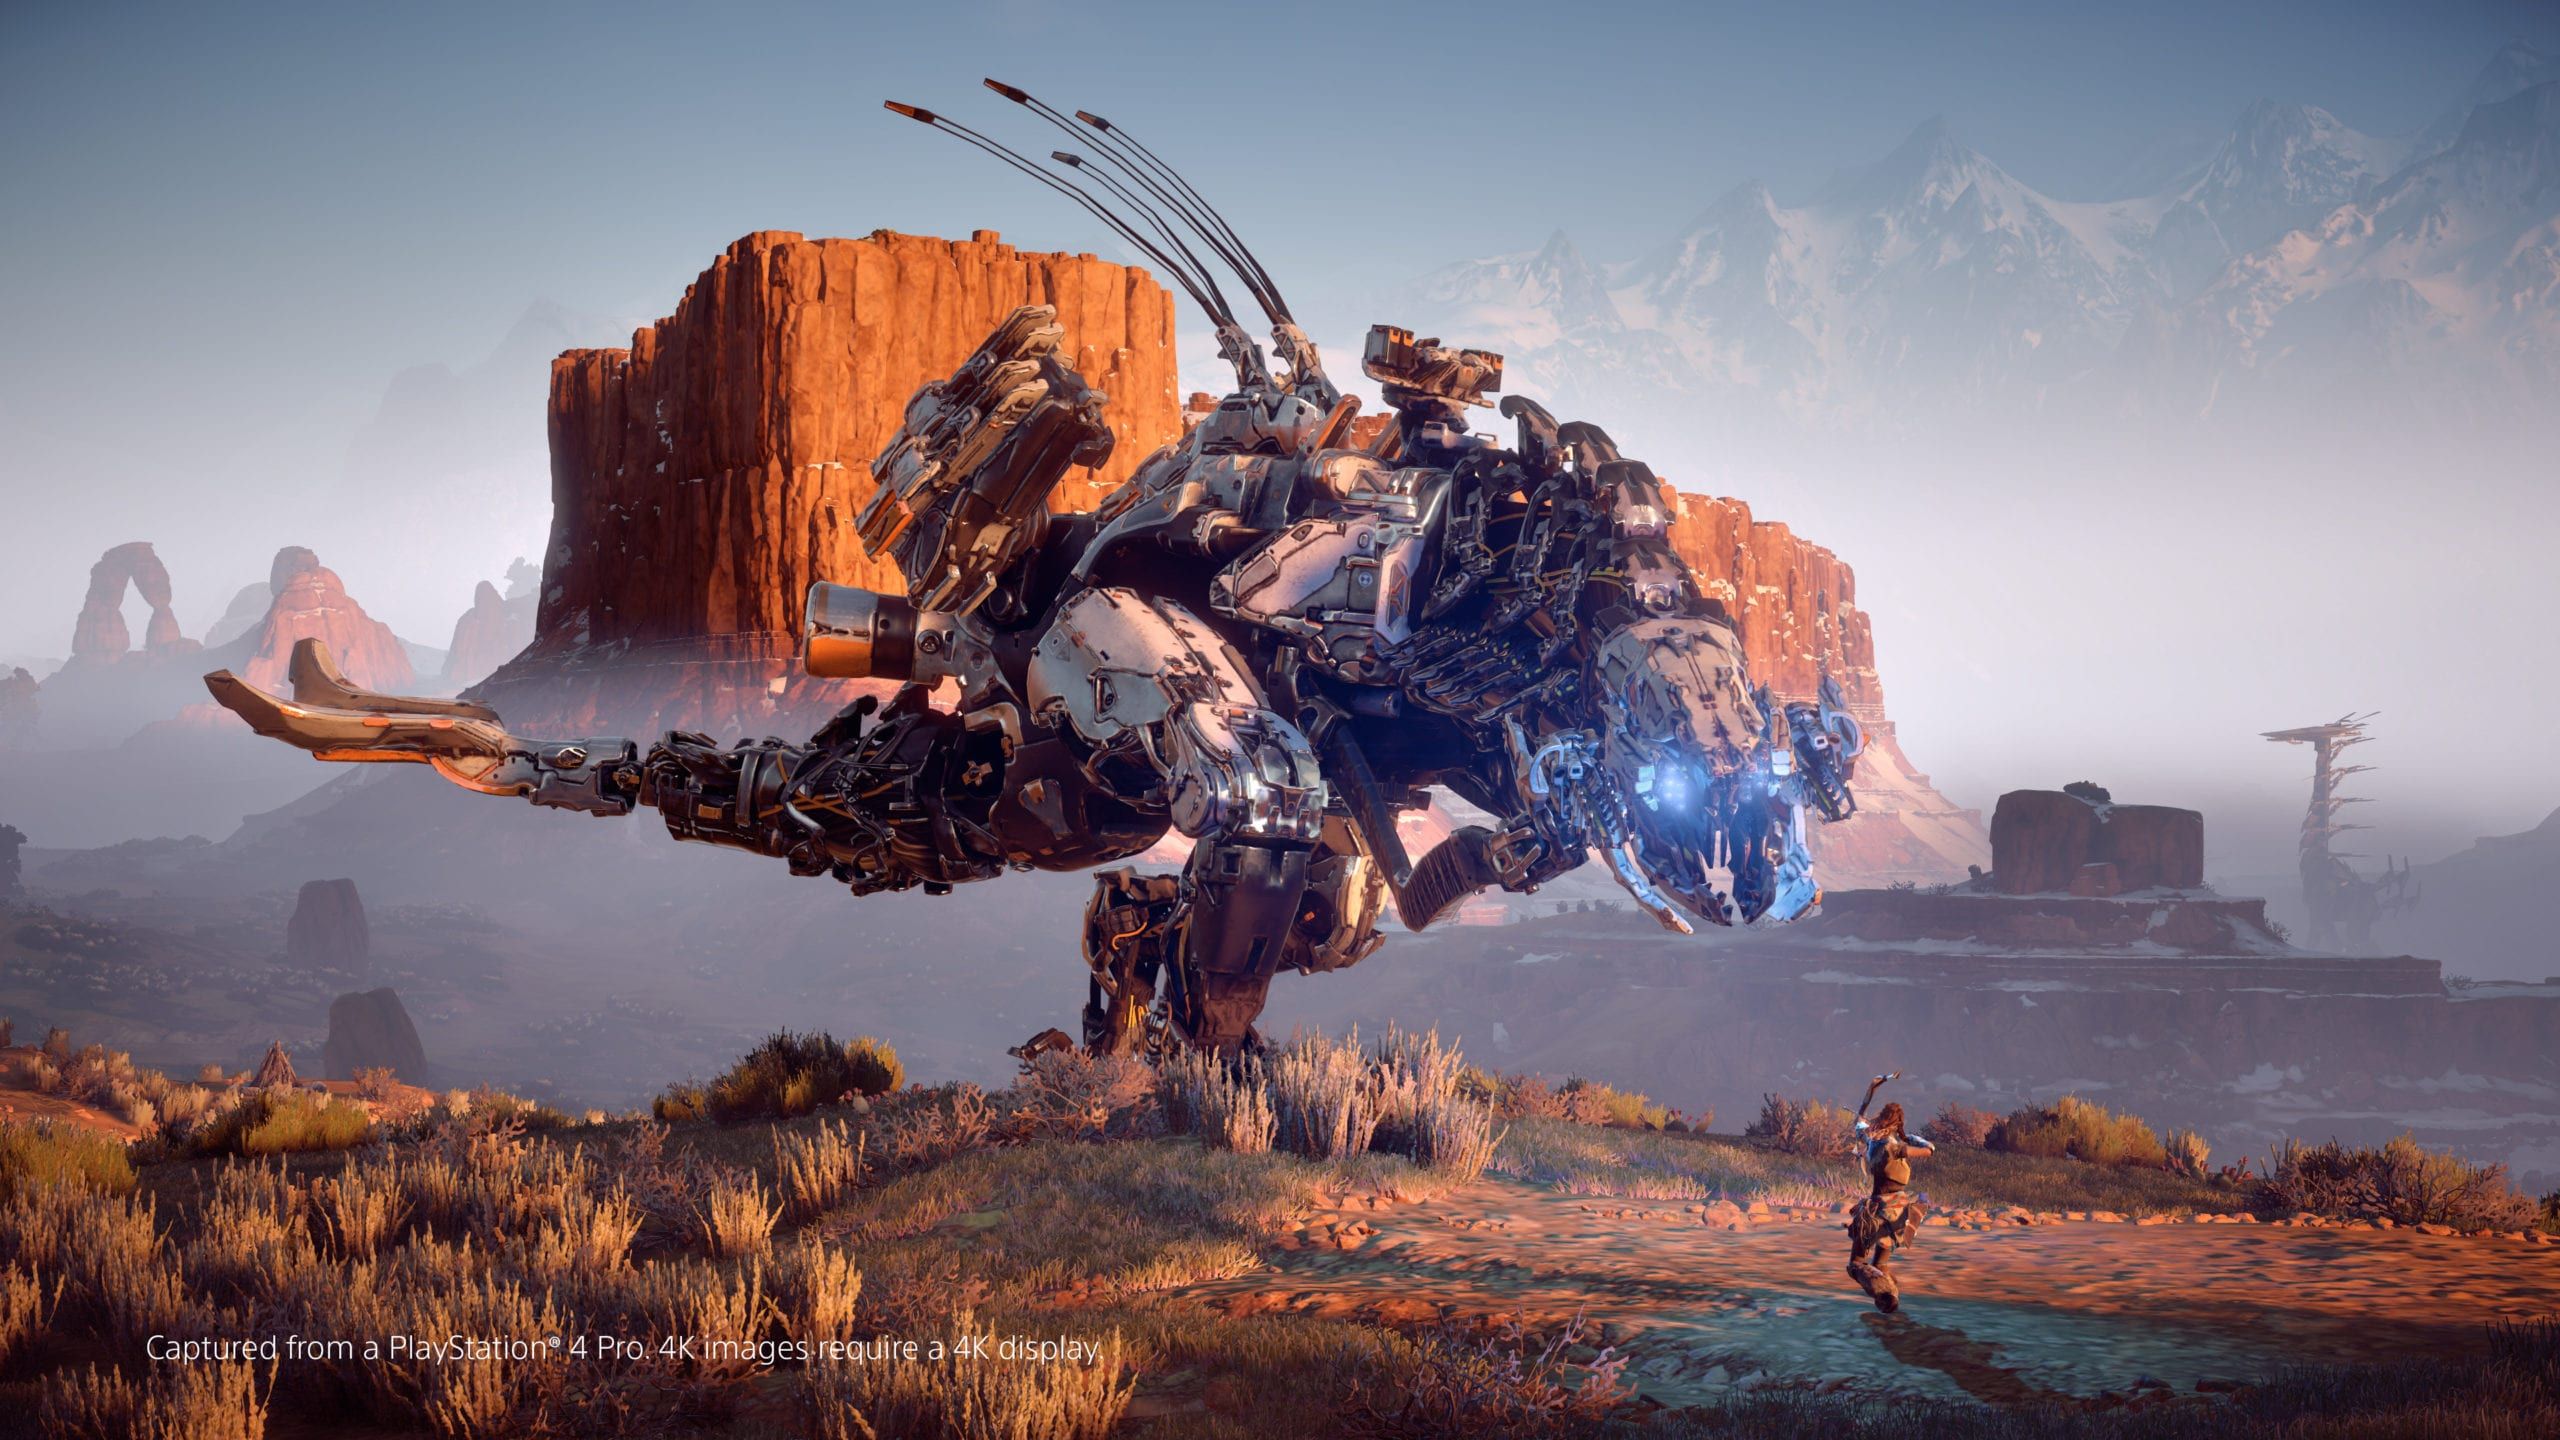 Horizon Zero Dawn PC System Requirements (Minimum and Recommended)